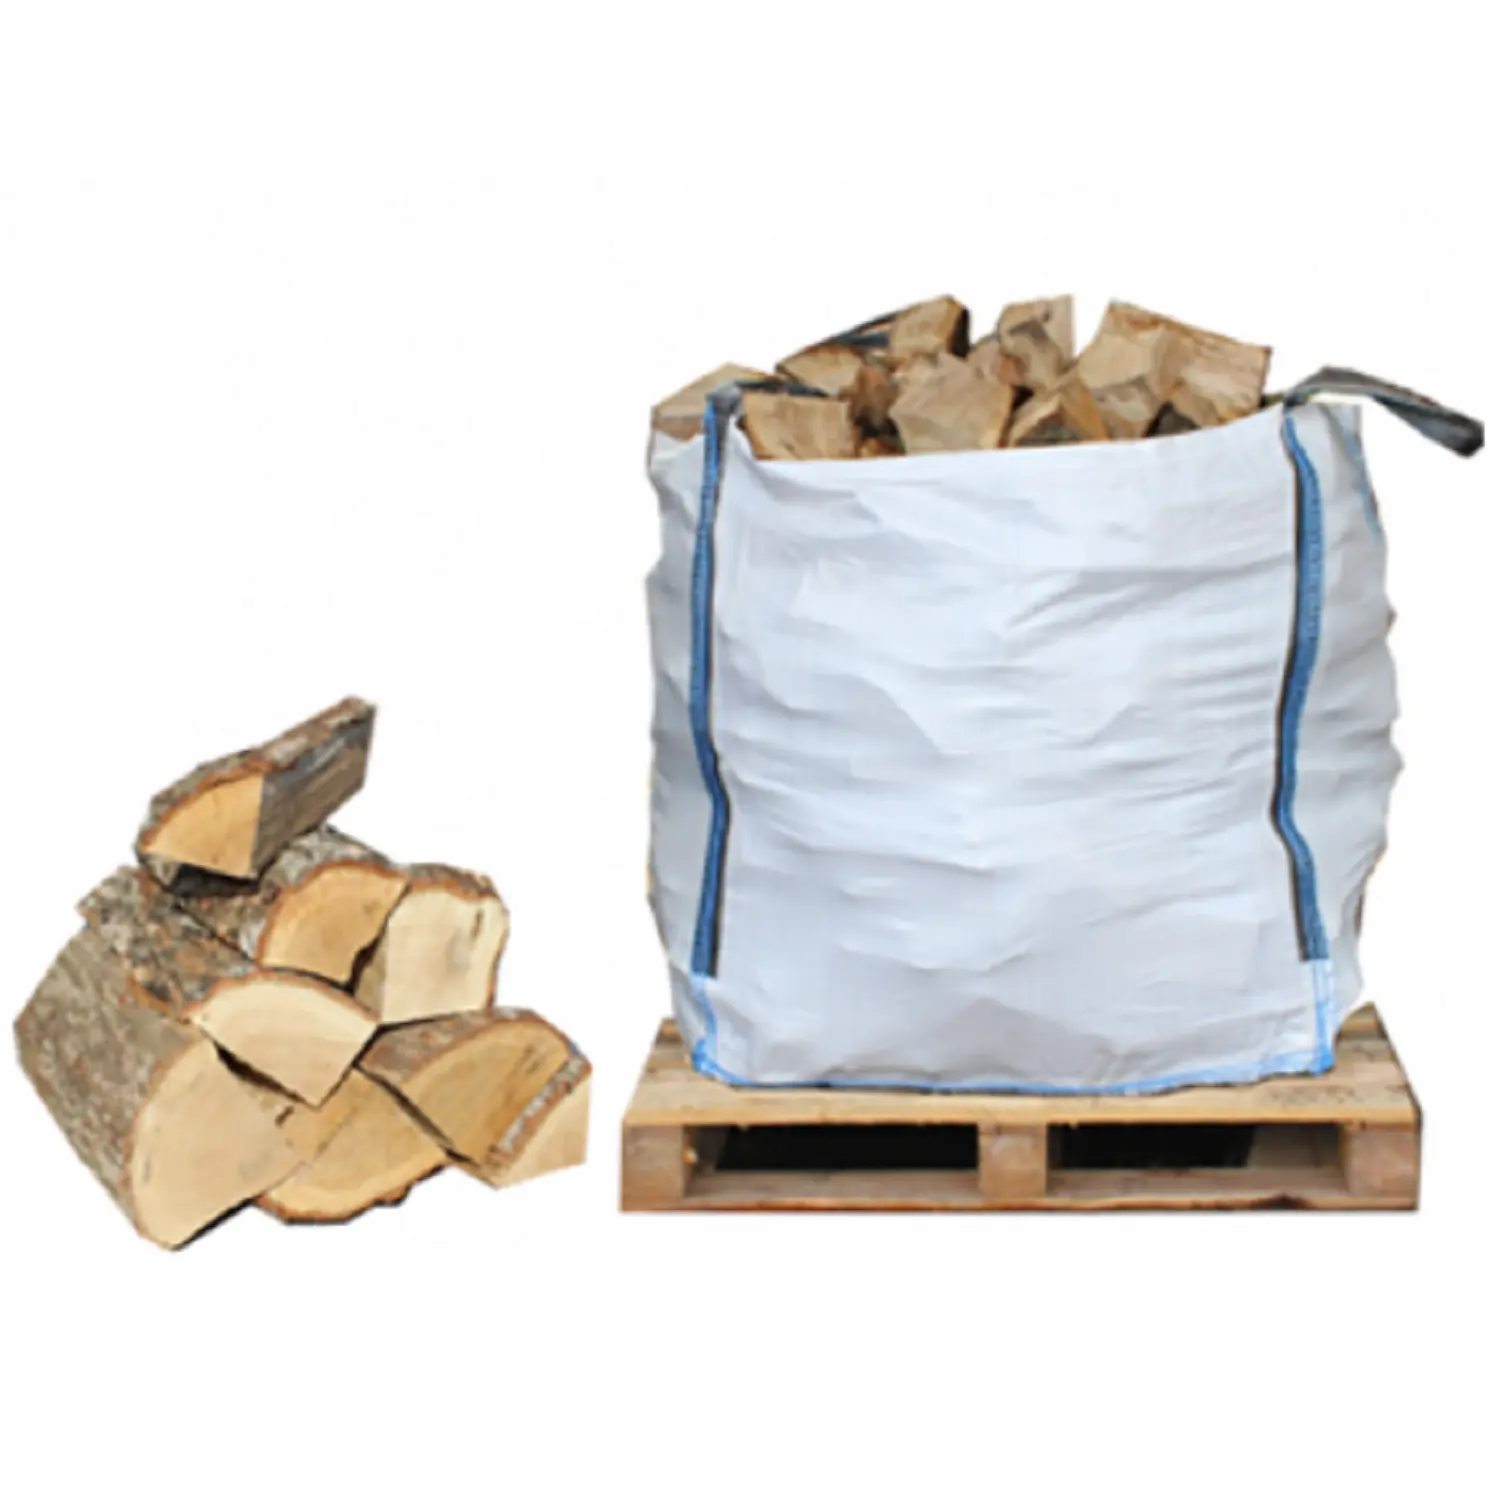 High Performing Oak Firewood/Firewood Logs Cheap price white oak logs sale firewood other energy related products wood